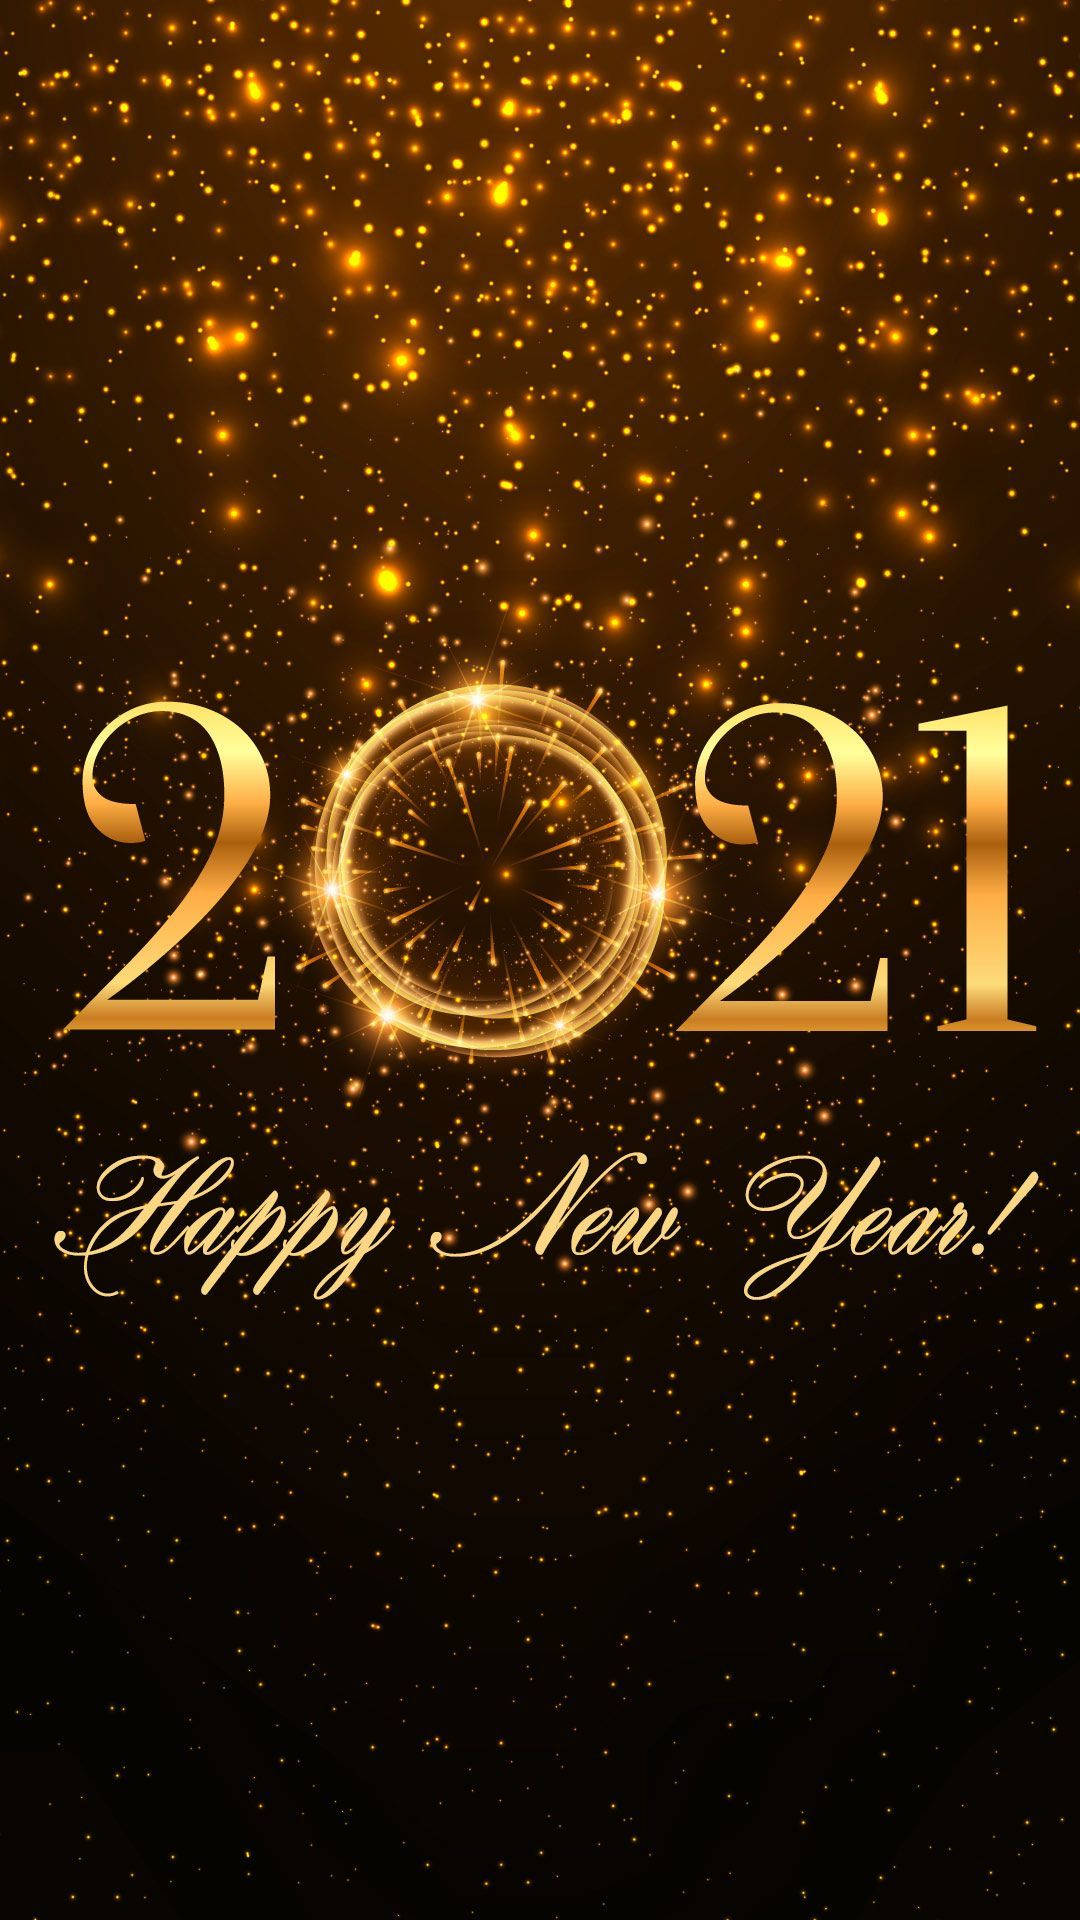 Happy New Year 2021 With Glittery Effects Background